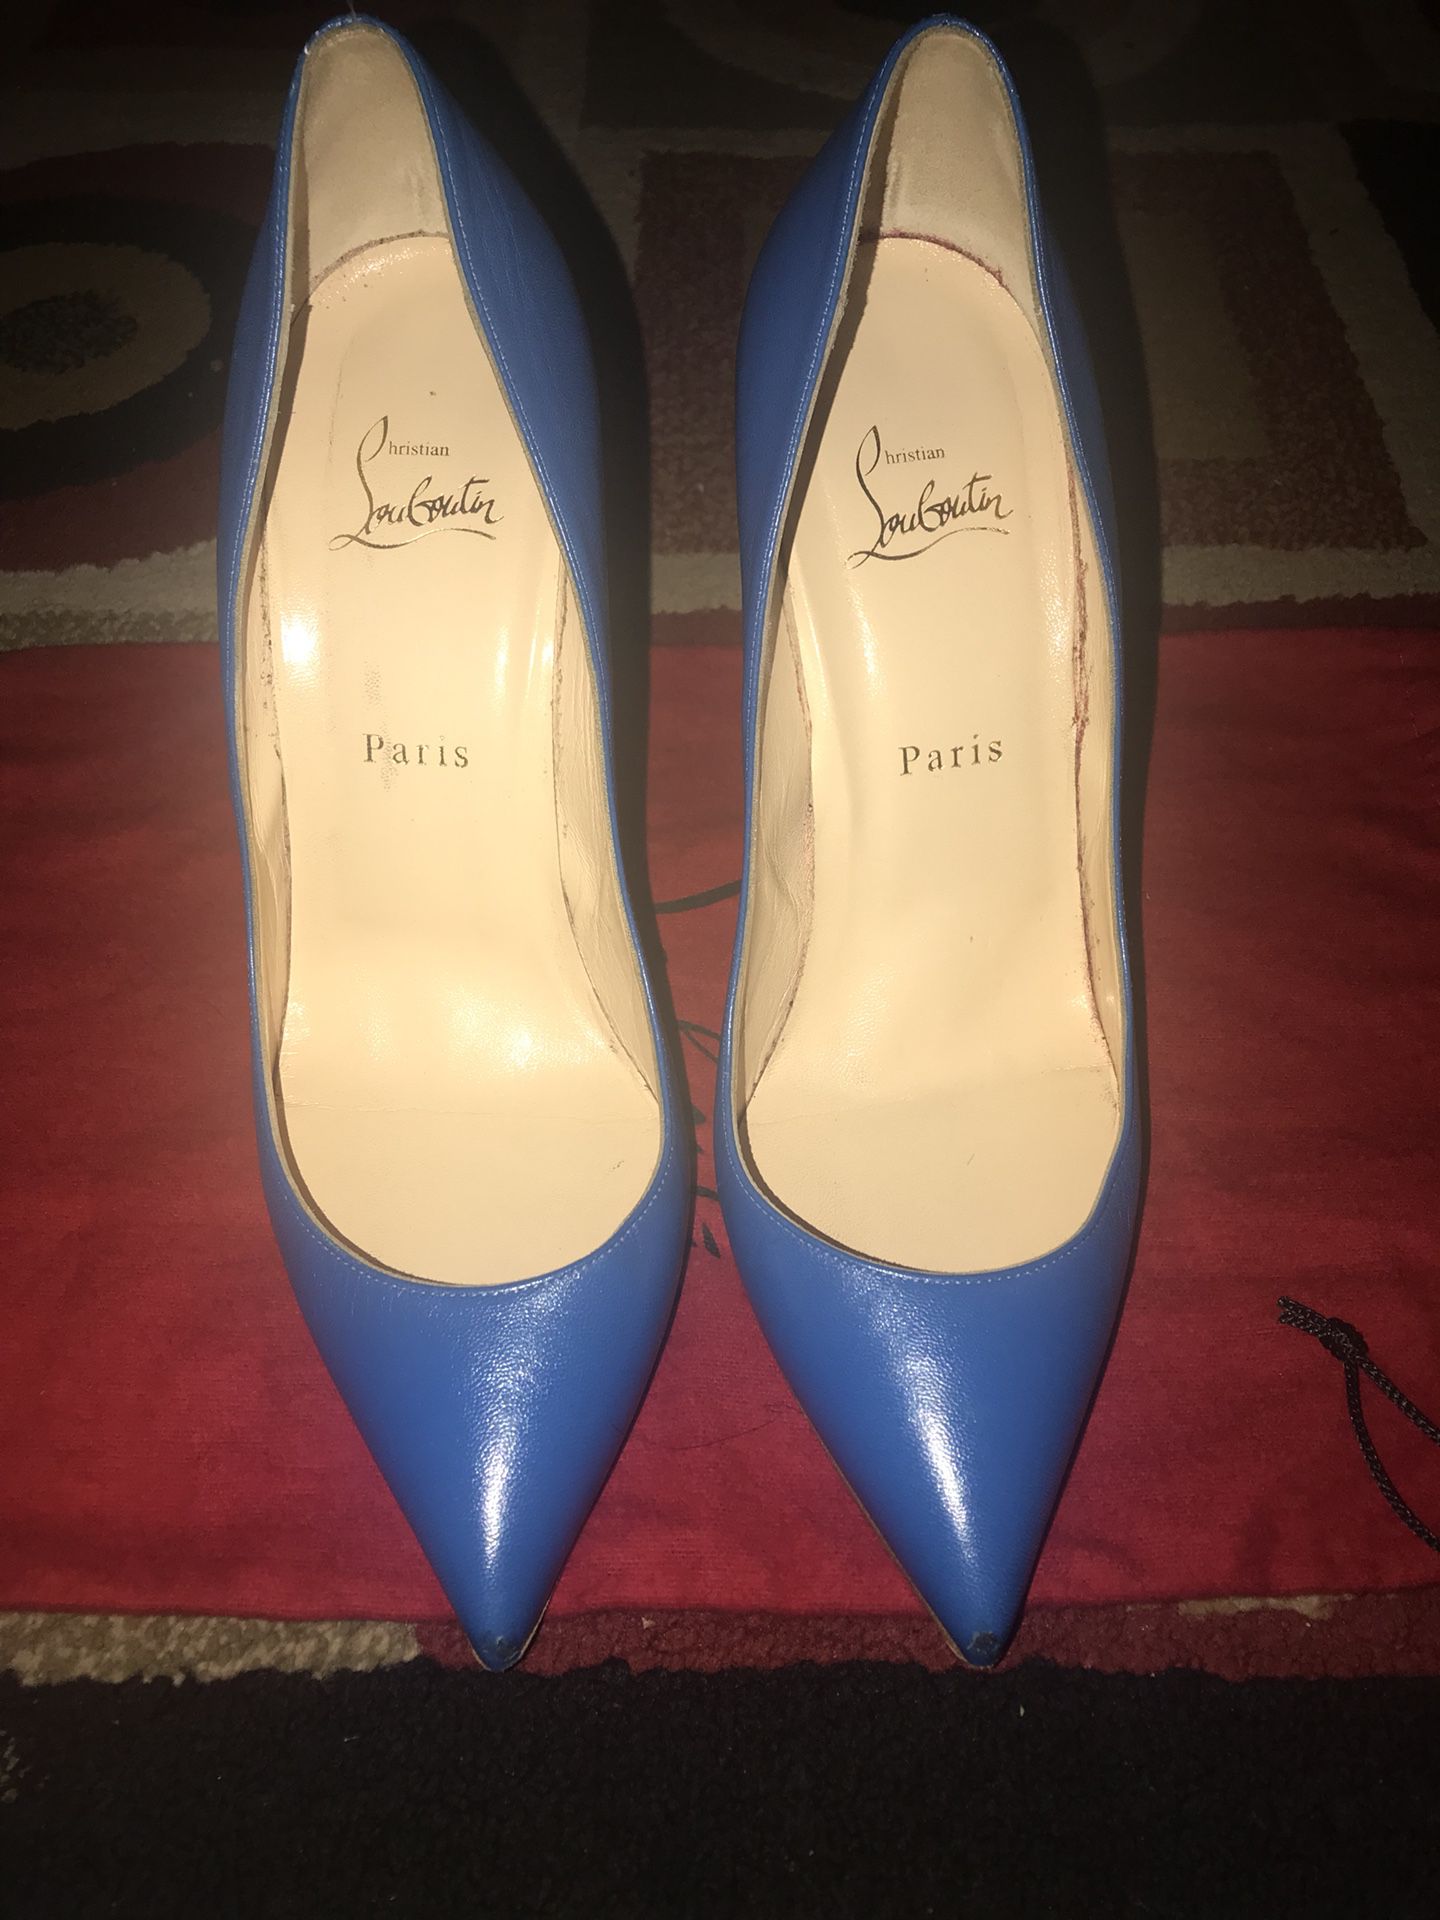 Christian Louboutin Pigalle 100 mm size 40